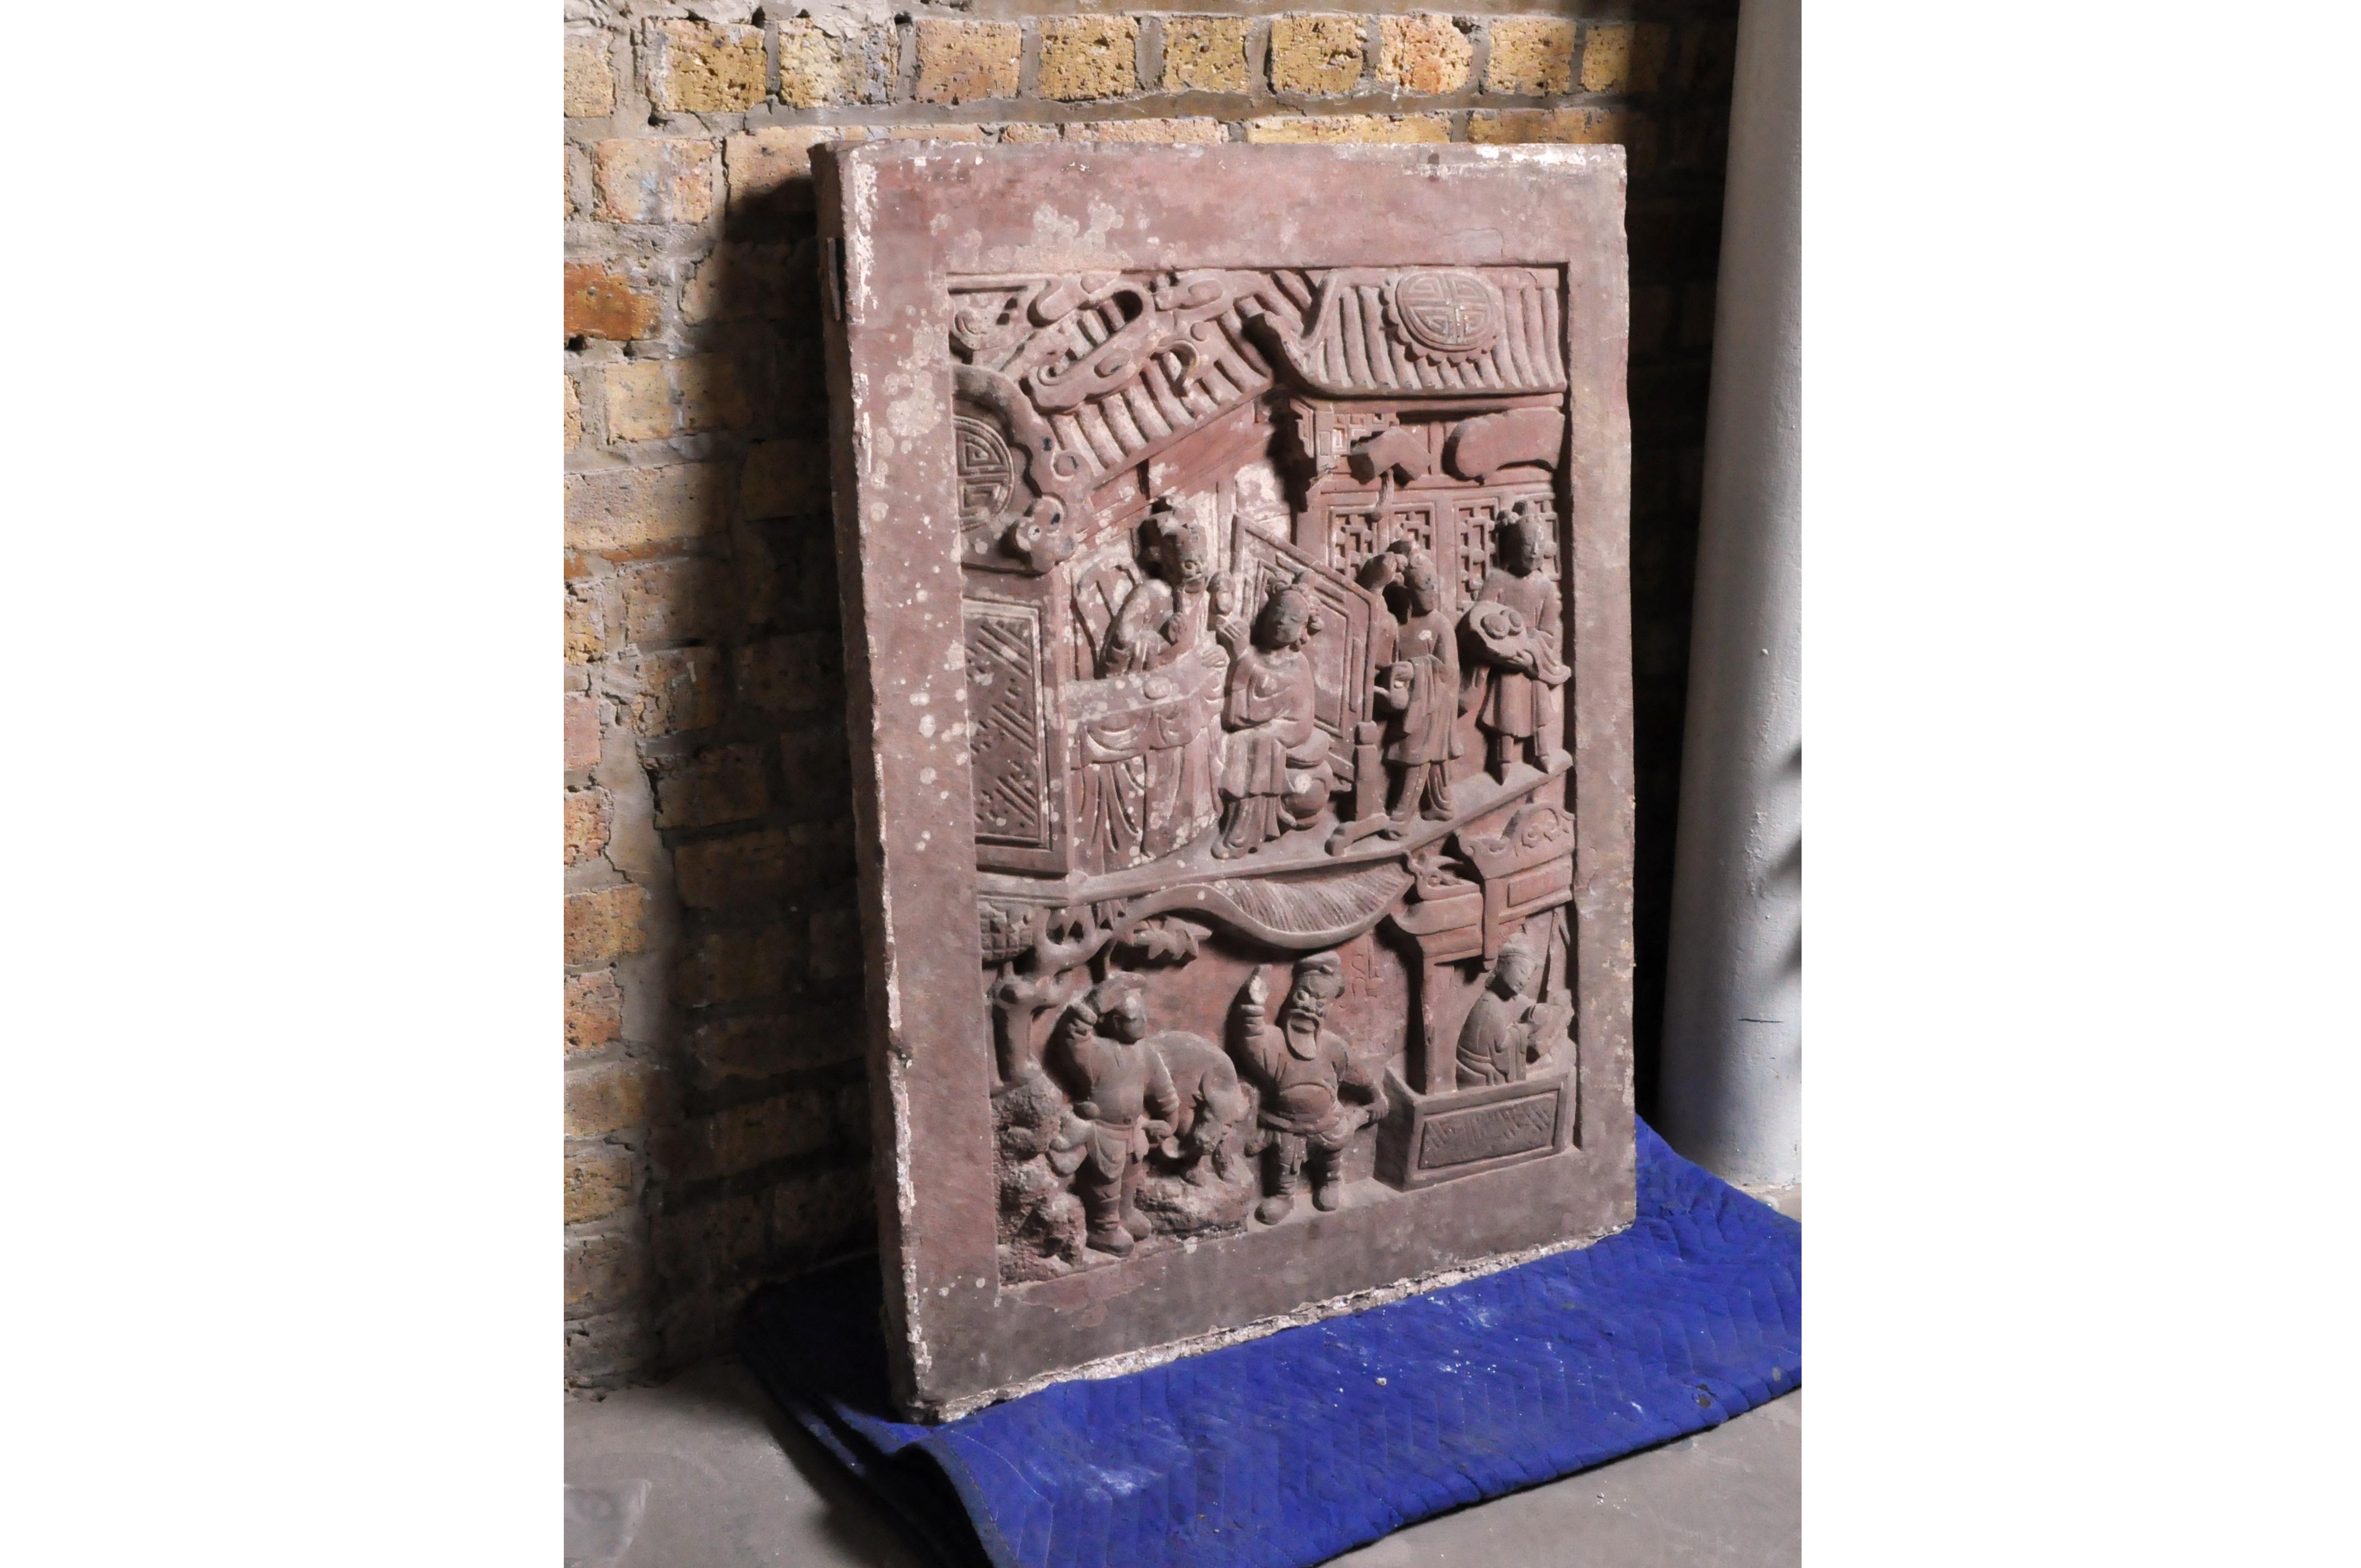 This red sandstone carving was once embedded in the wall surrounding an aristocratic compound. It depicts scholars in a garden, eating and conversing. It came from Shanxi Province and dates to the 18th Century. Such carvings are quite rare now as